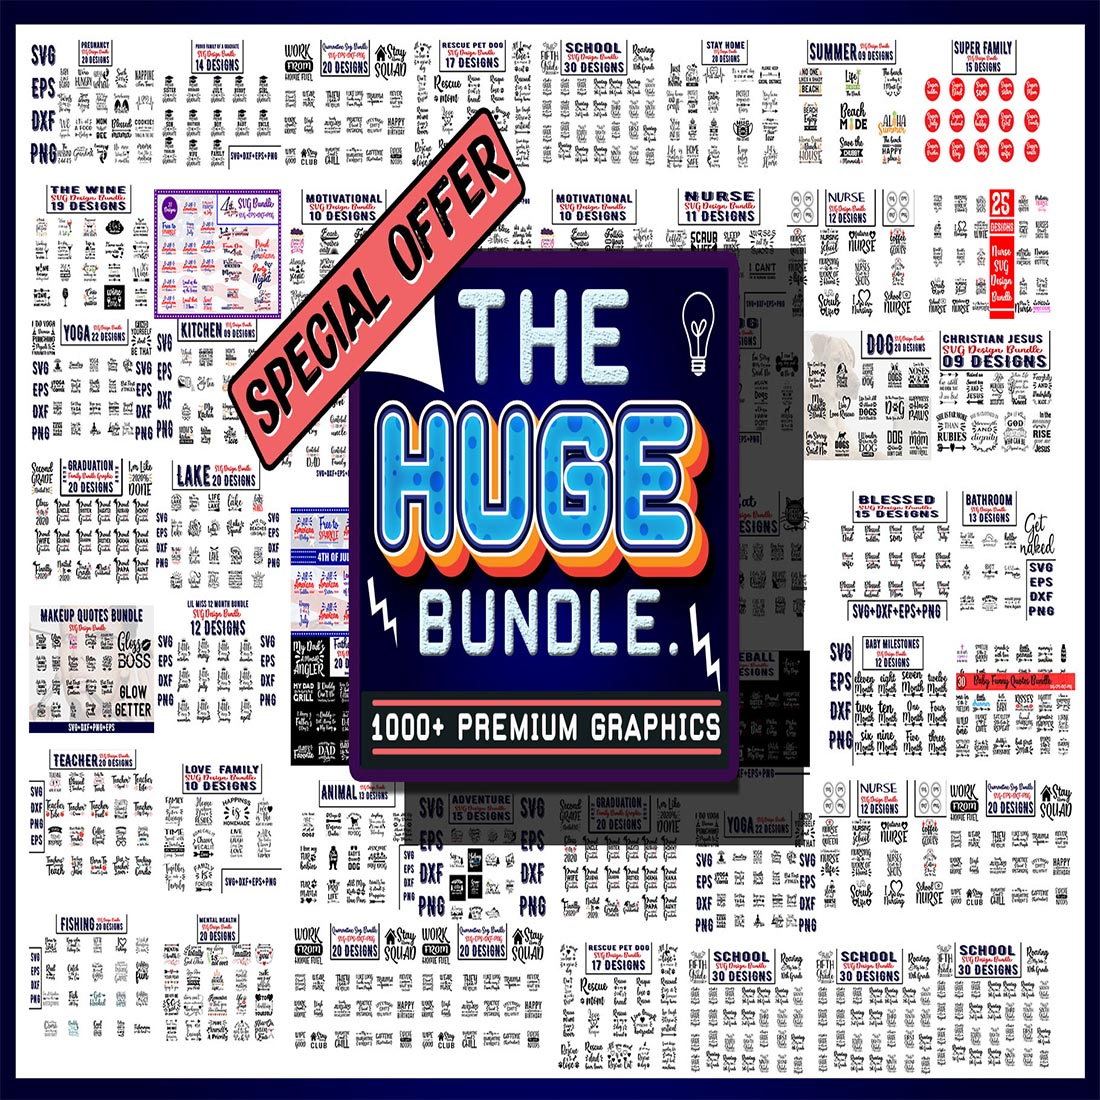 The huge bundle is on display with a price tag.